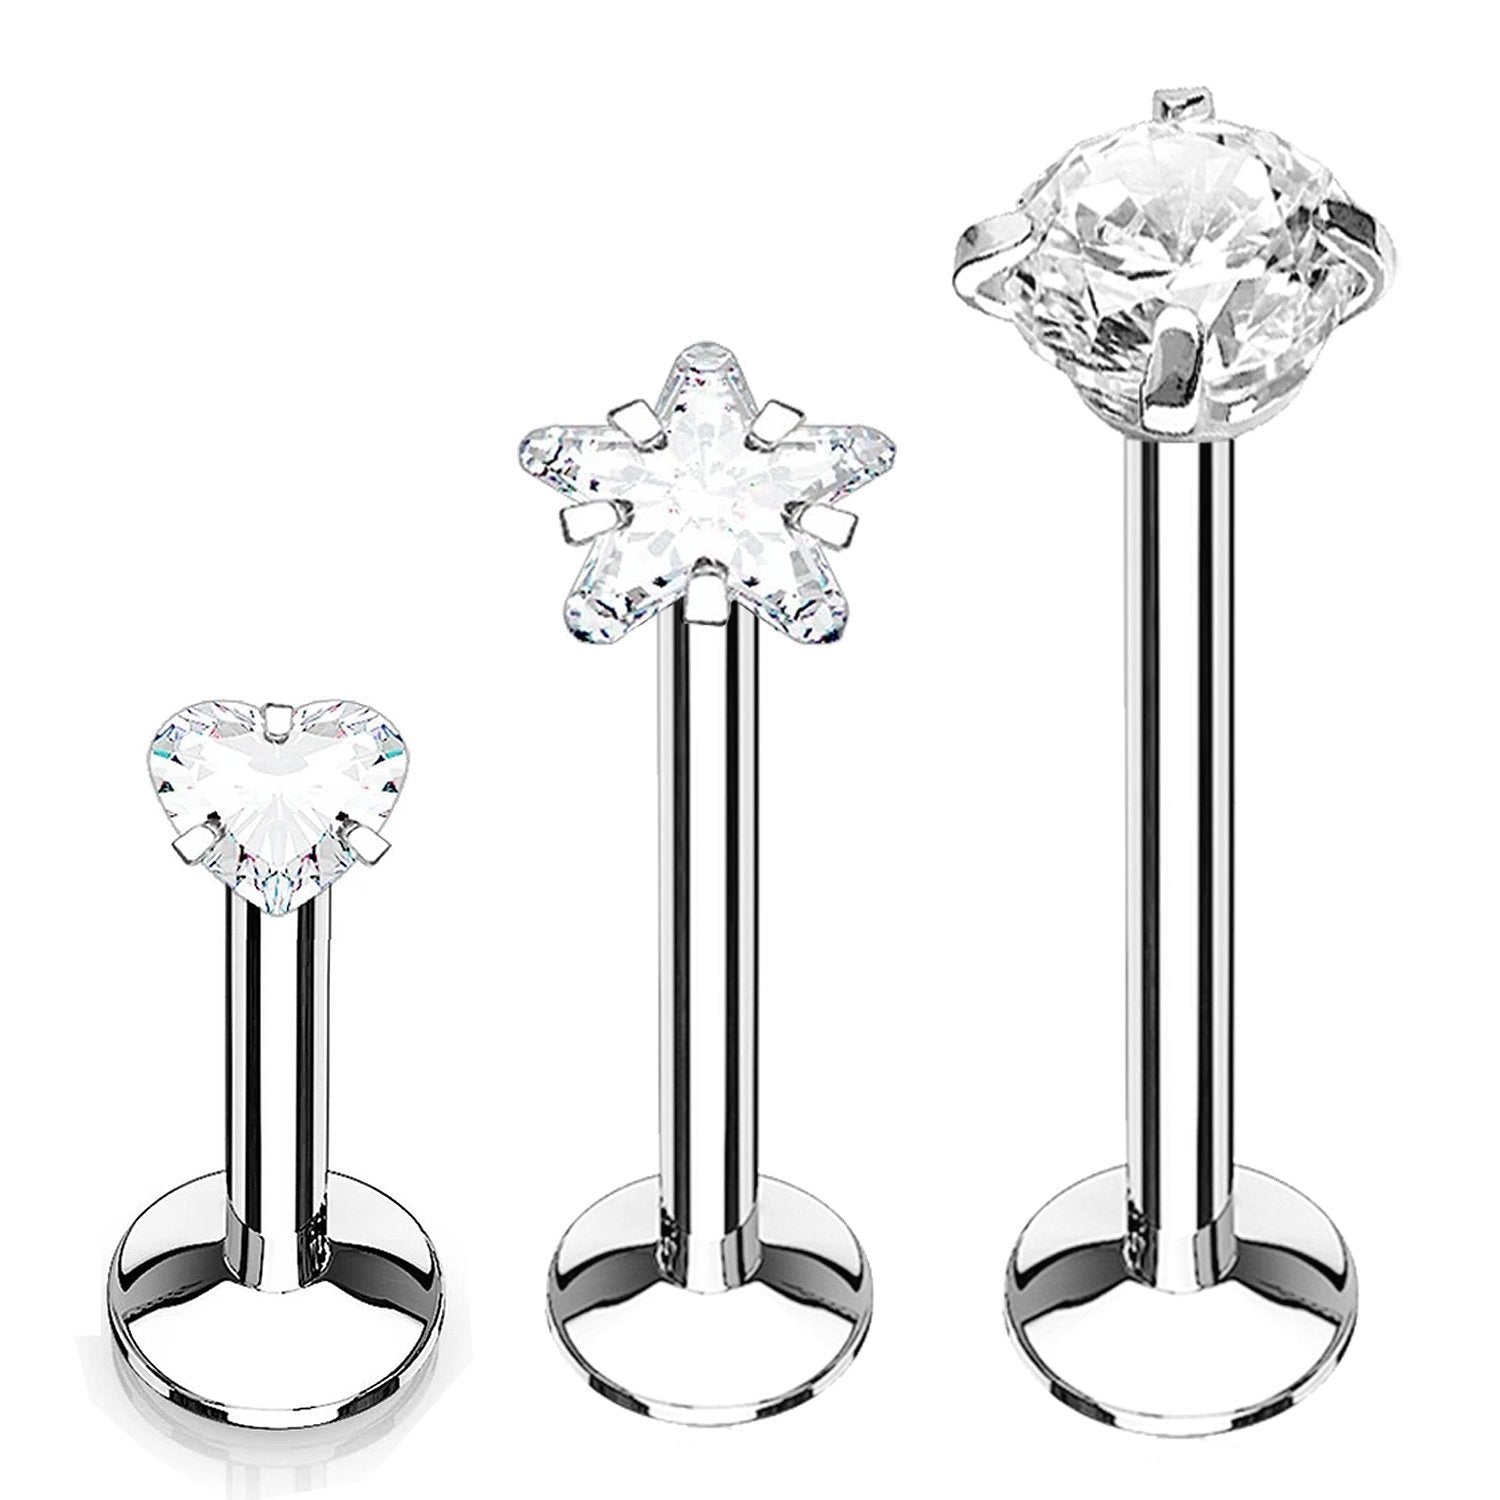 3PC Labret Stud Tragus Earring Set 16G CZ Crystal Surgical Steel